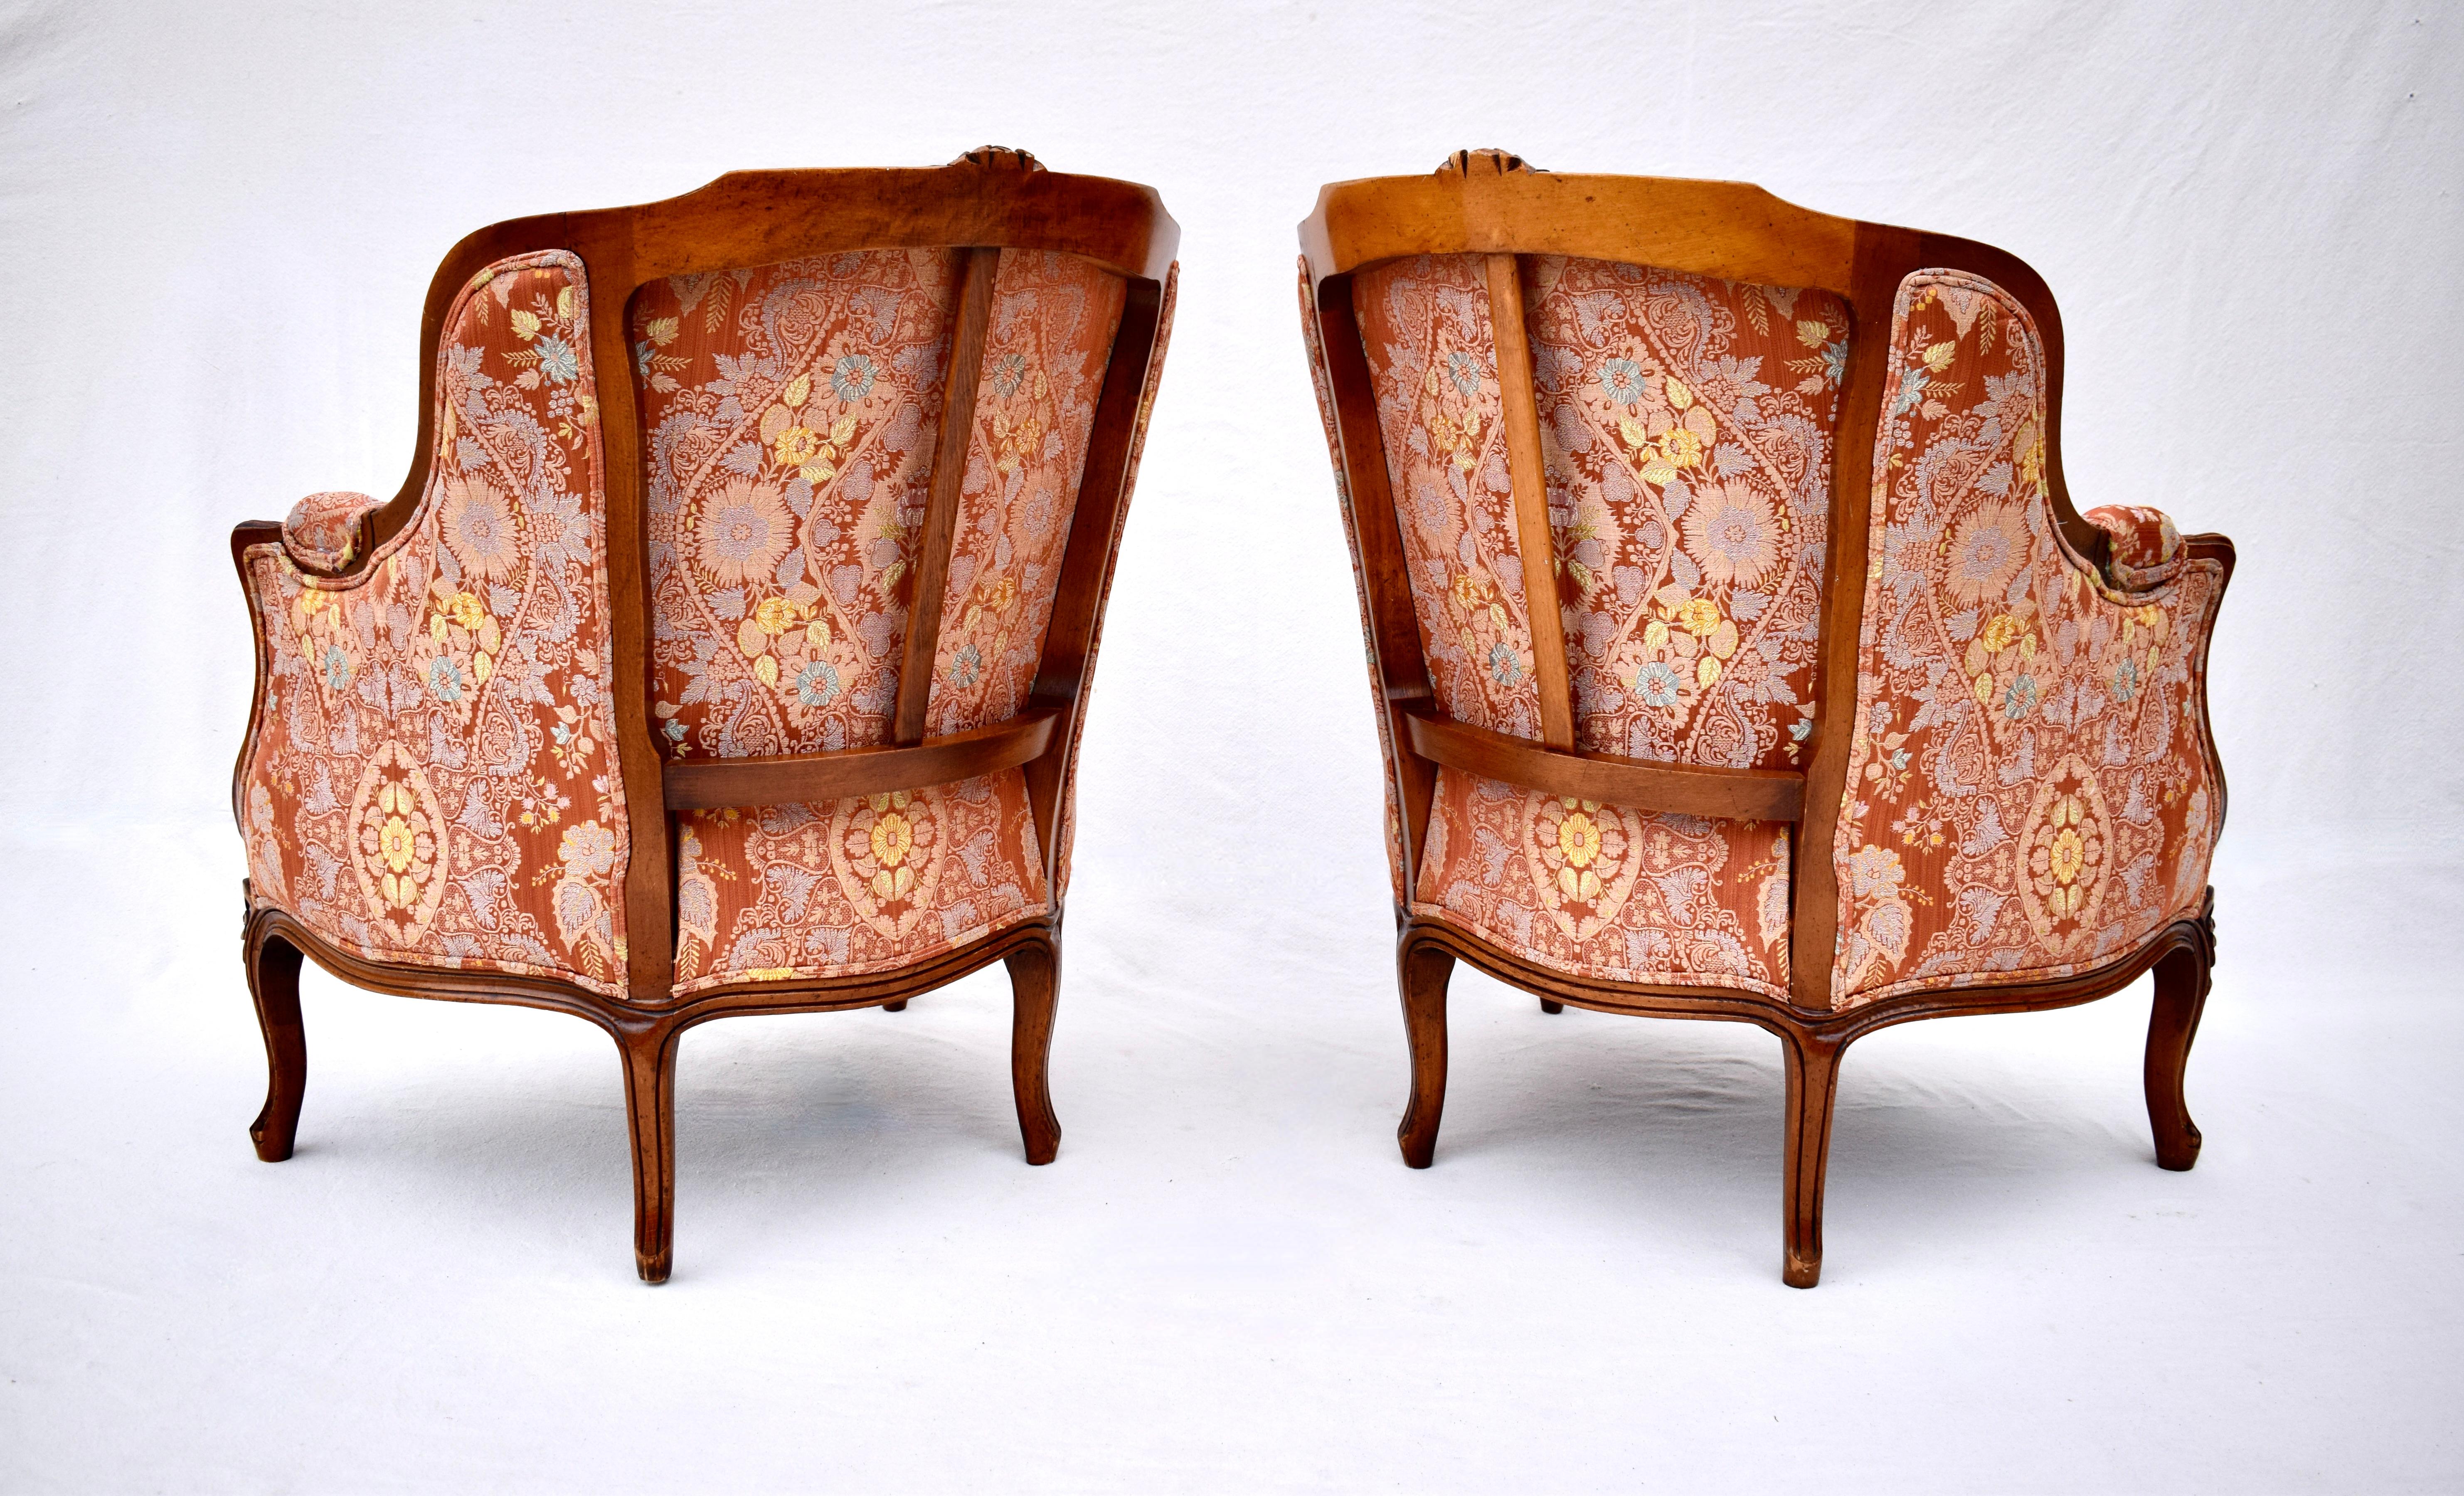 Damask Early 20th C. Louis XV Style French Bergere Chairs, Pair